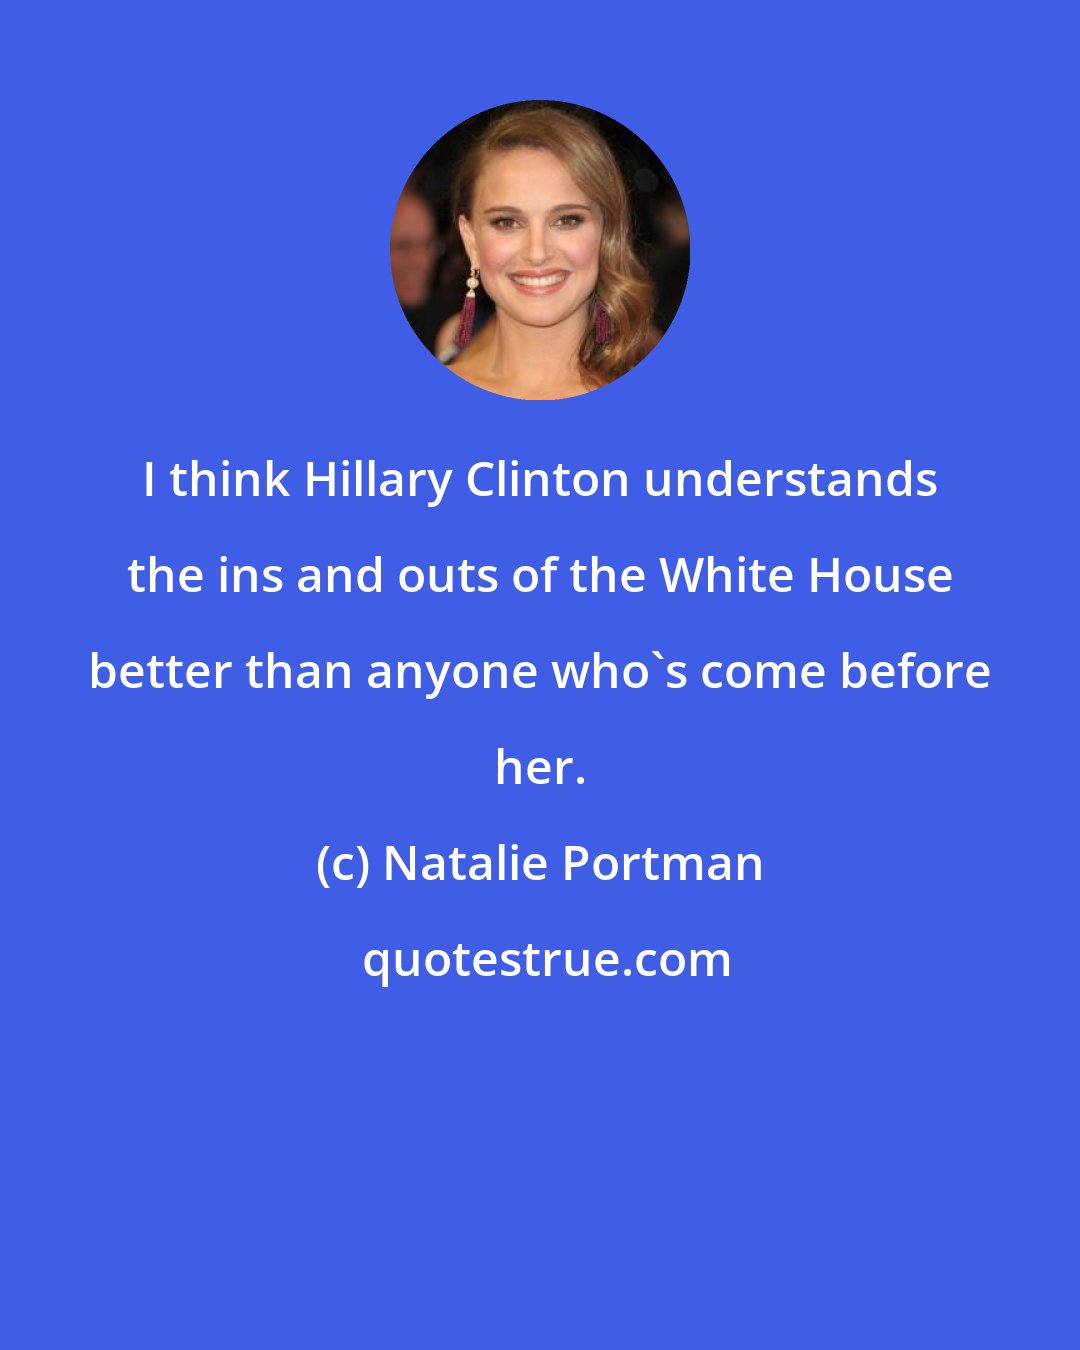 Natalie Portman: I think Hillary Clinton understands the ins and outs of the White House better than anyone who's come before her.